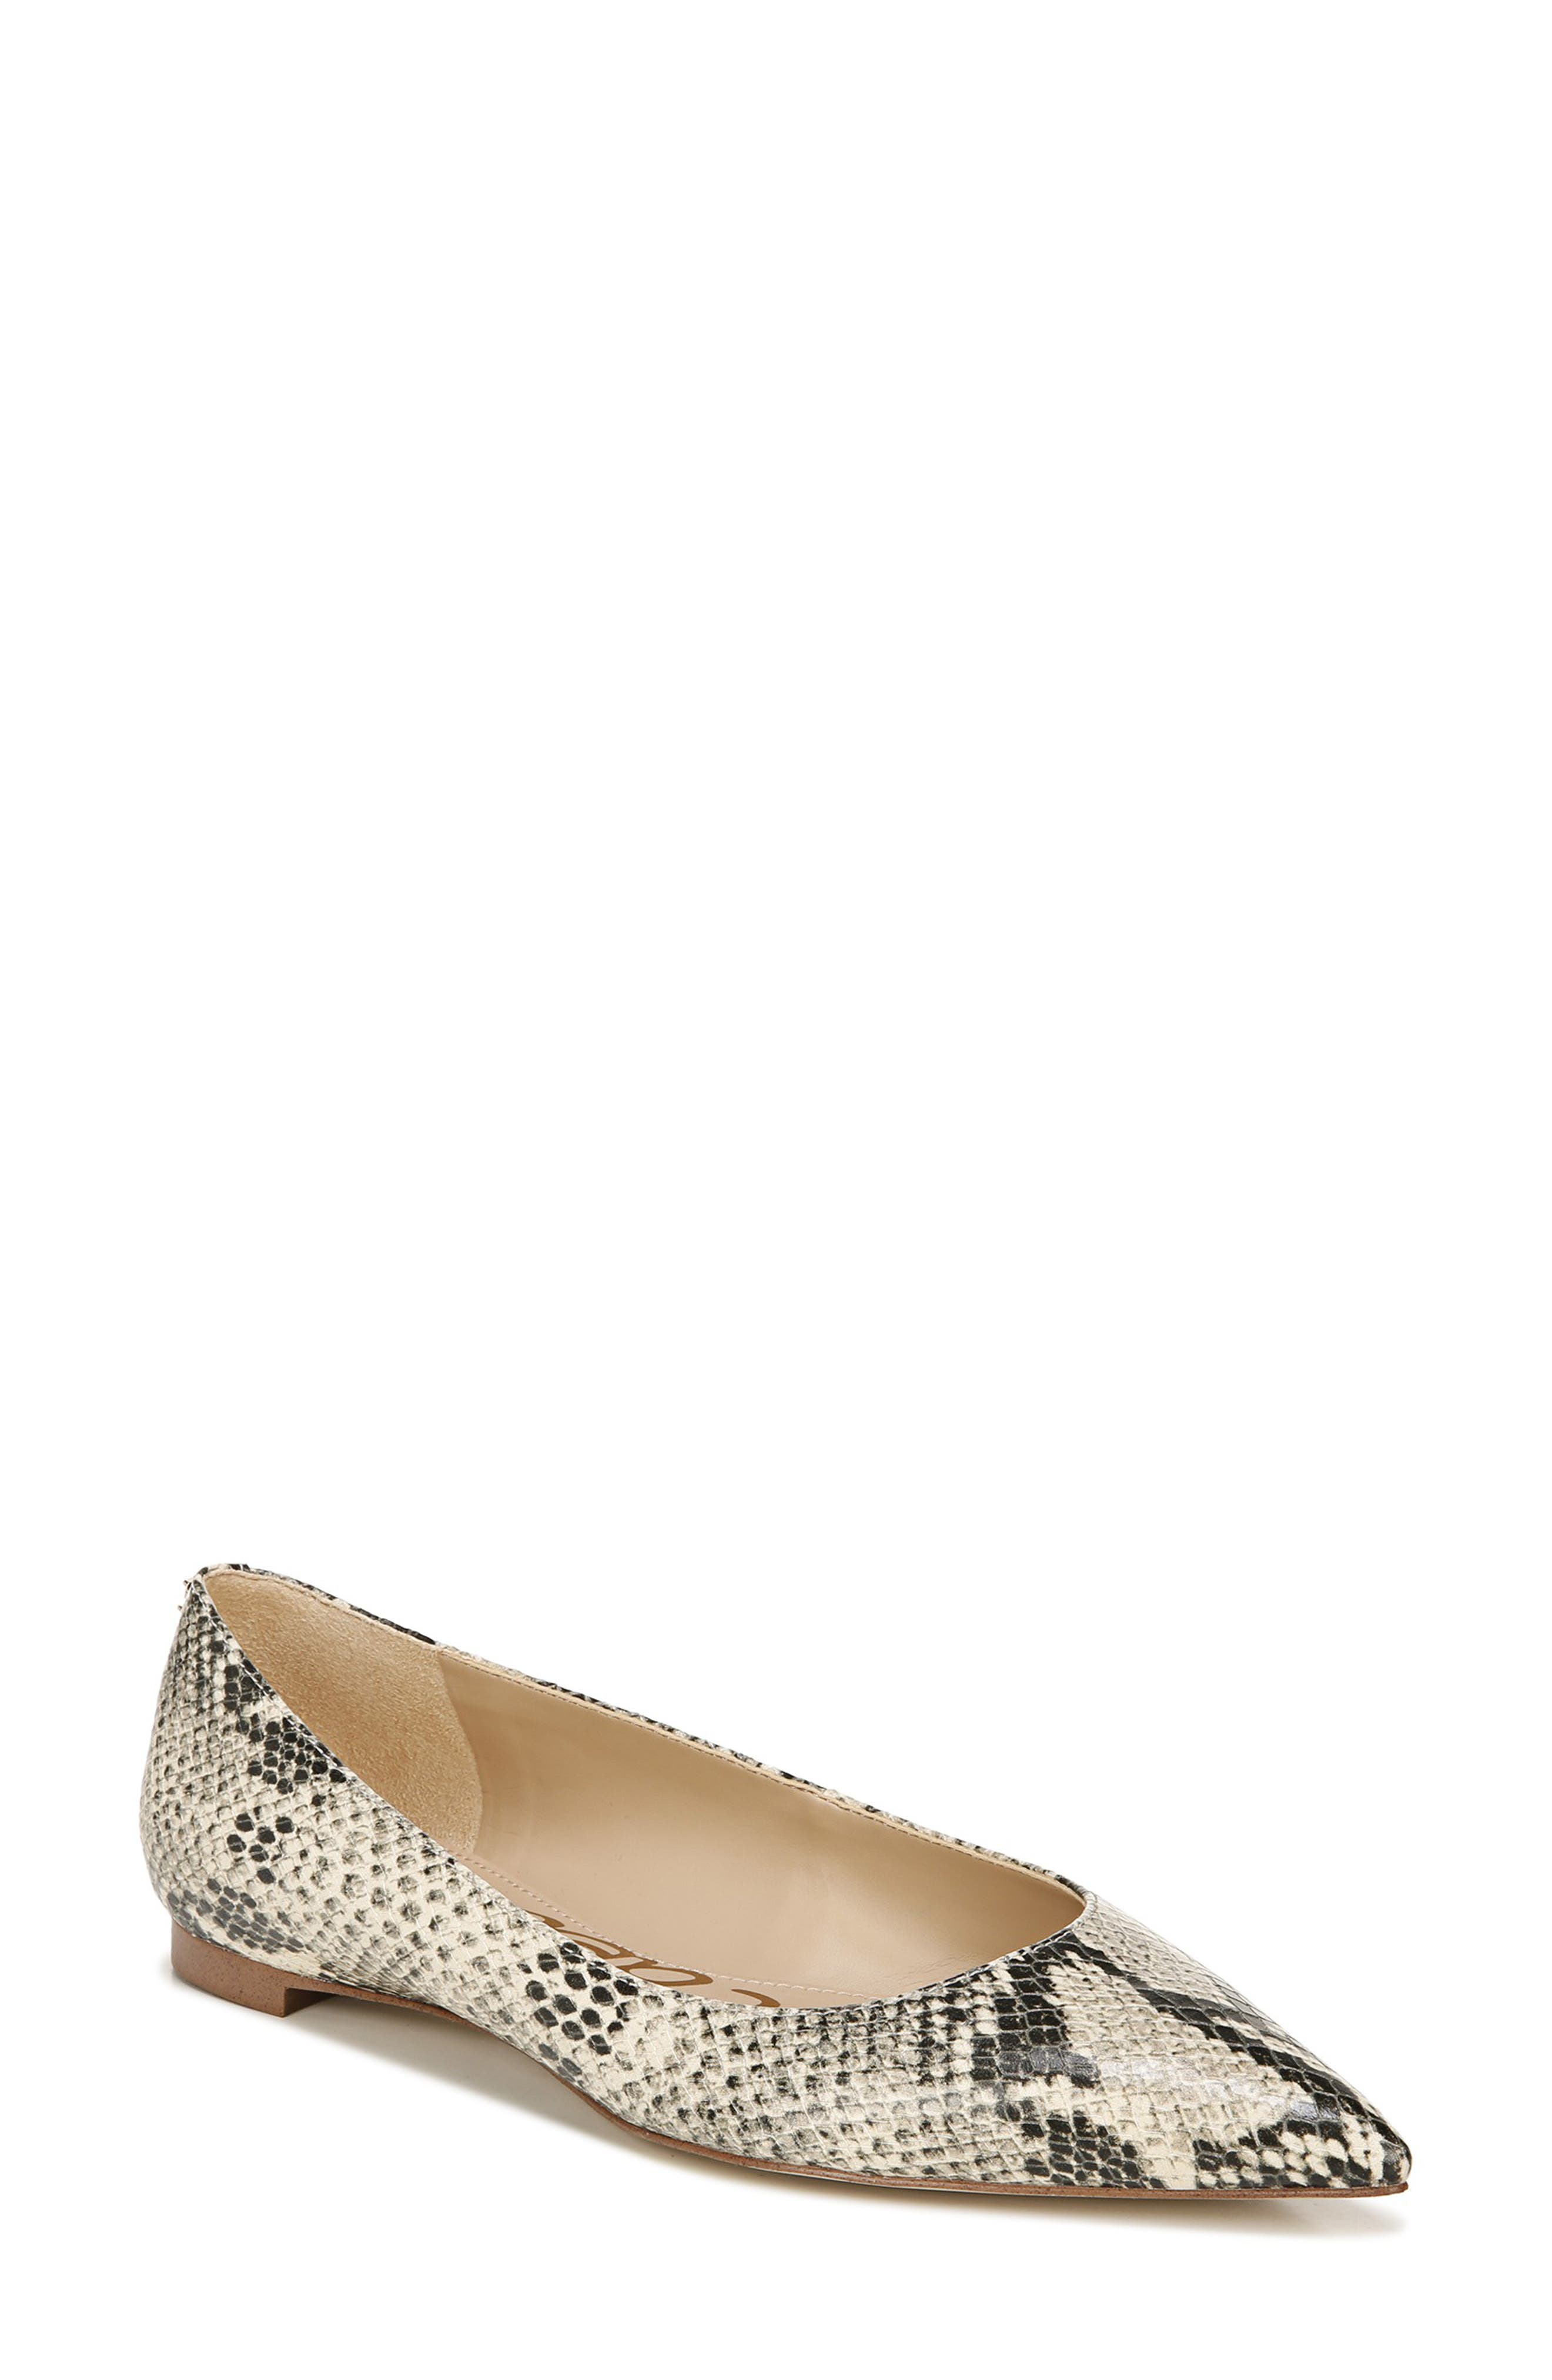 SAM EDELMAN STACEY POINTED TOE FLAT,017113873001